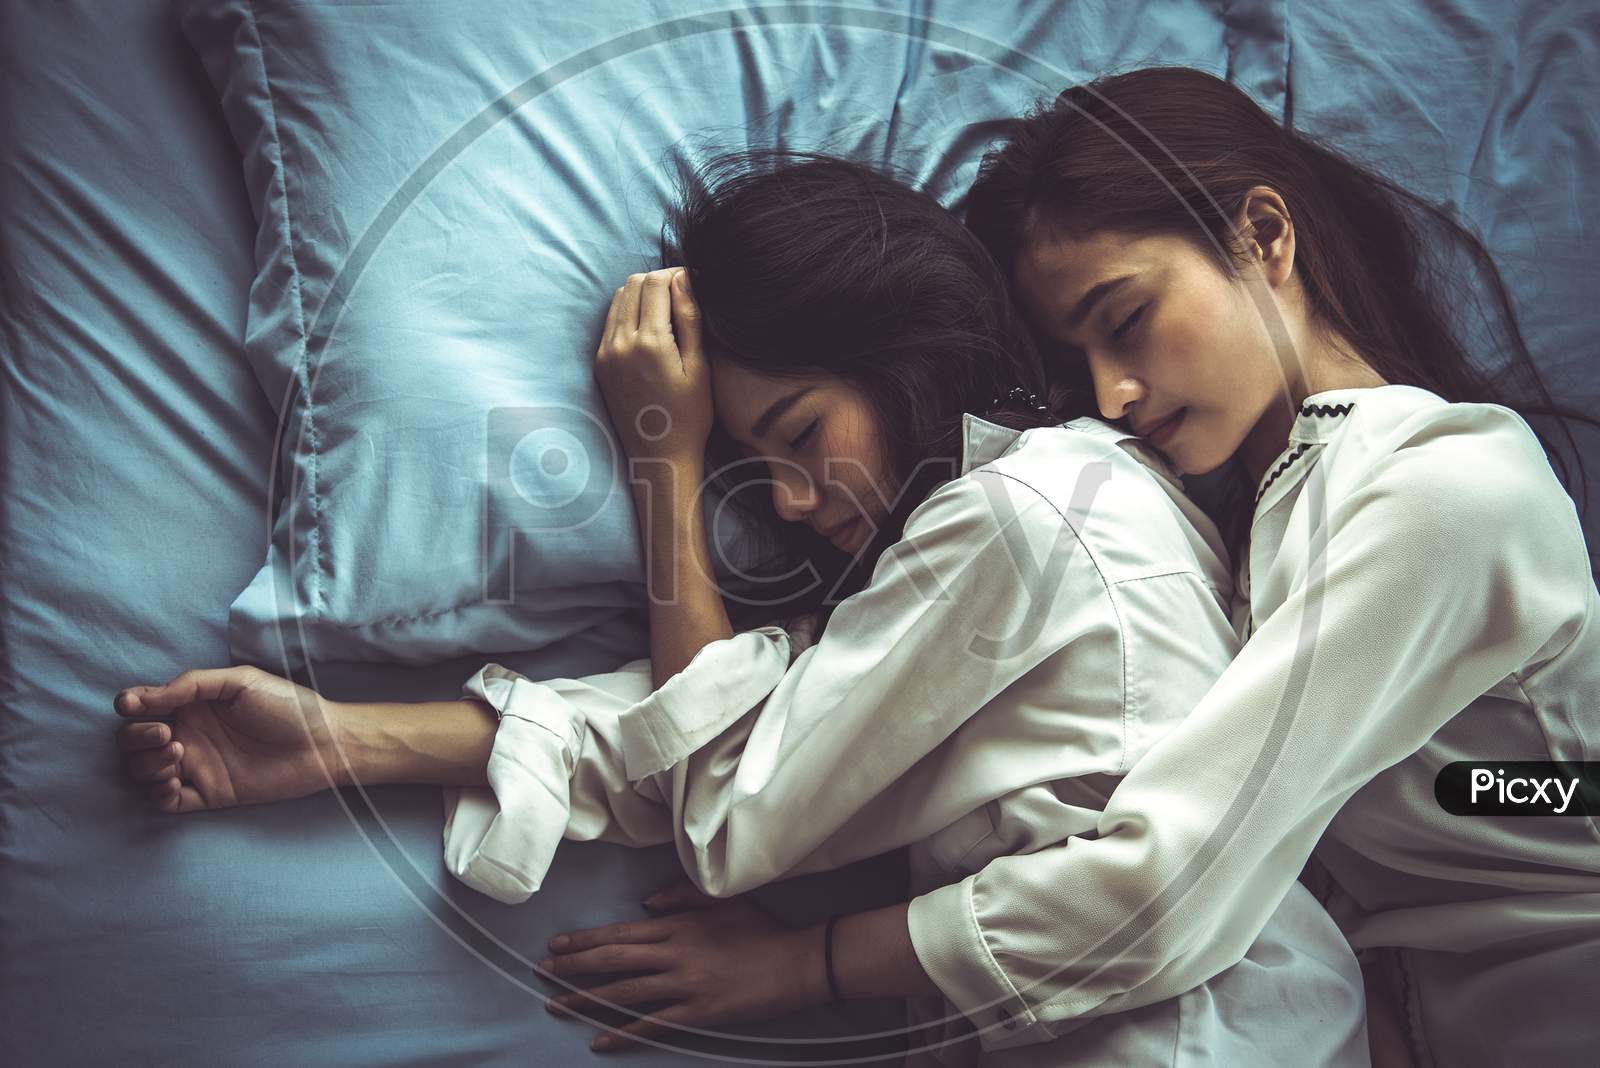 Image Of Top View Of Two Asian Women Sleeping On Bed Together Lesbian